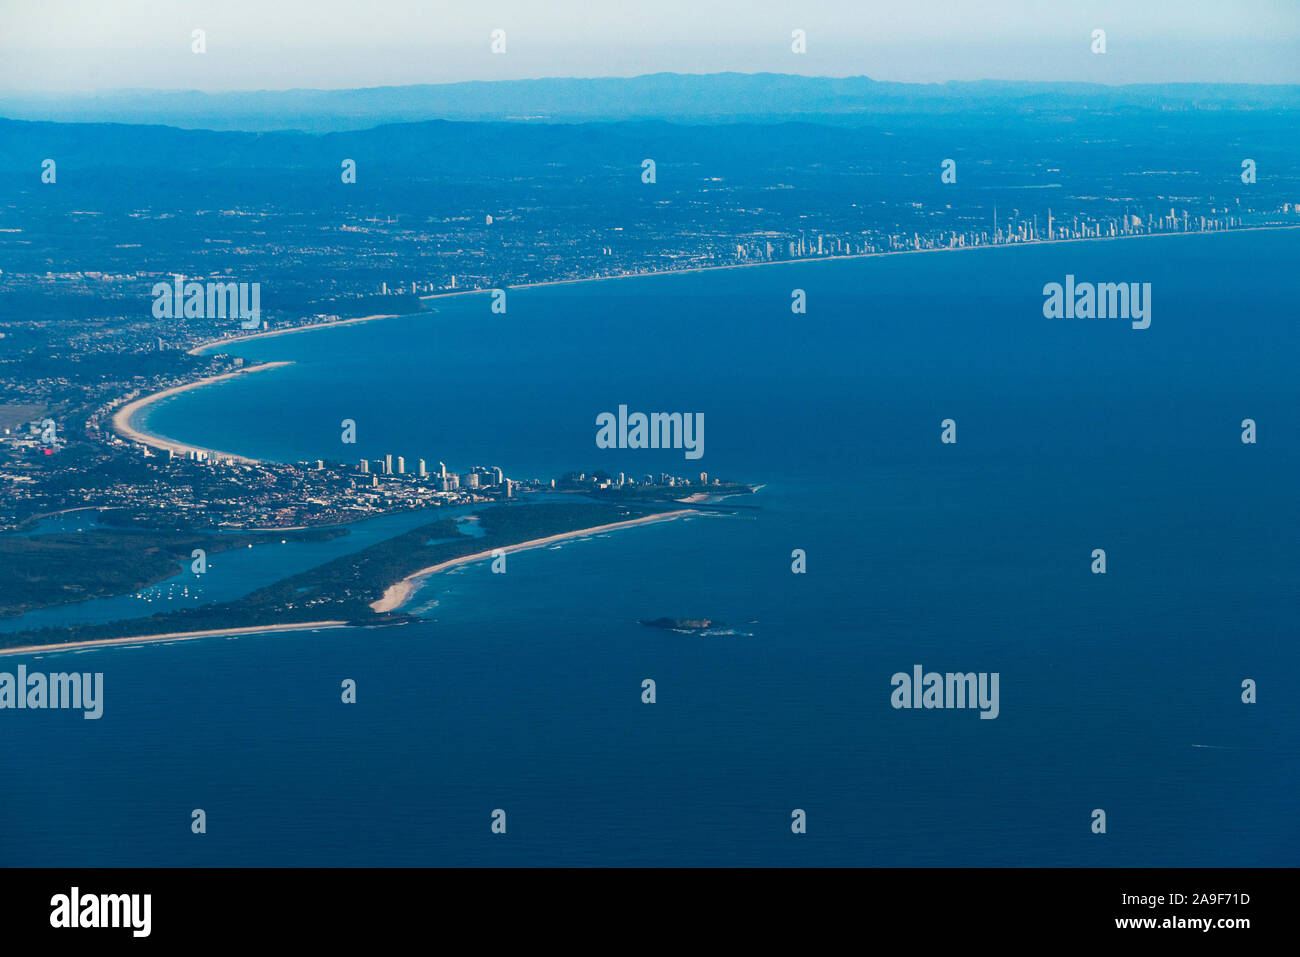 Aerial view of border between Australian states New South Wales and Qweensland with view of Coolangatta and Gold Coast, Australia Stock Photo